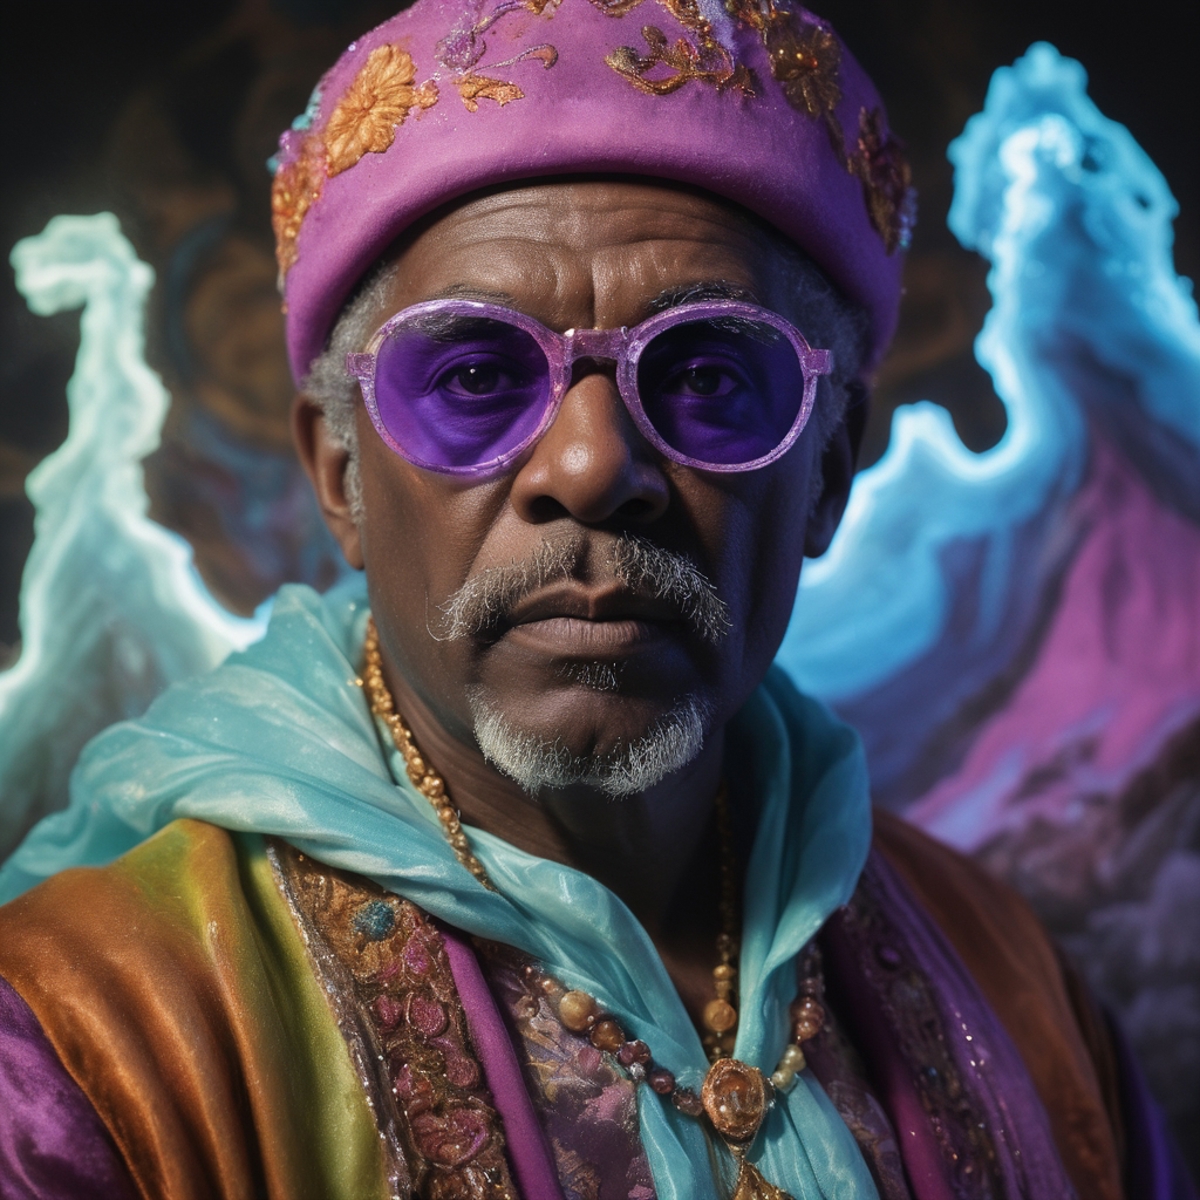 A man wearing a purple hat, purple glasses, and a gold and purple robe.